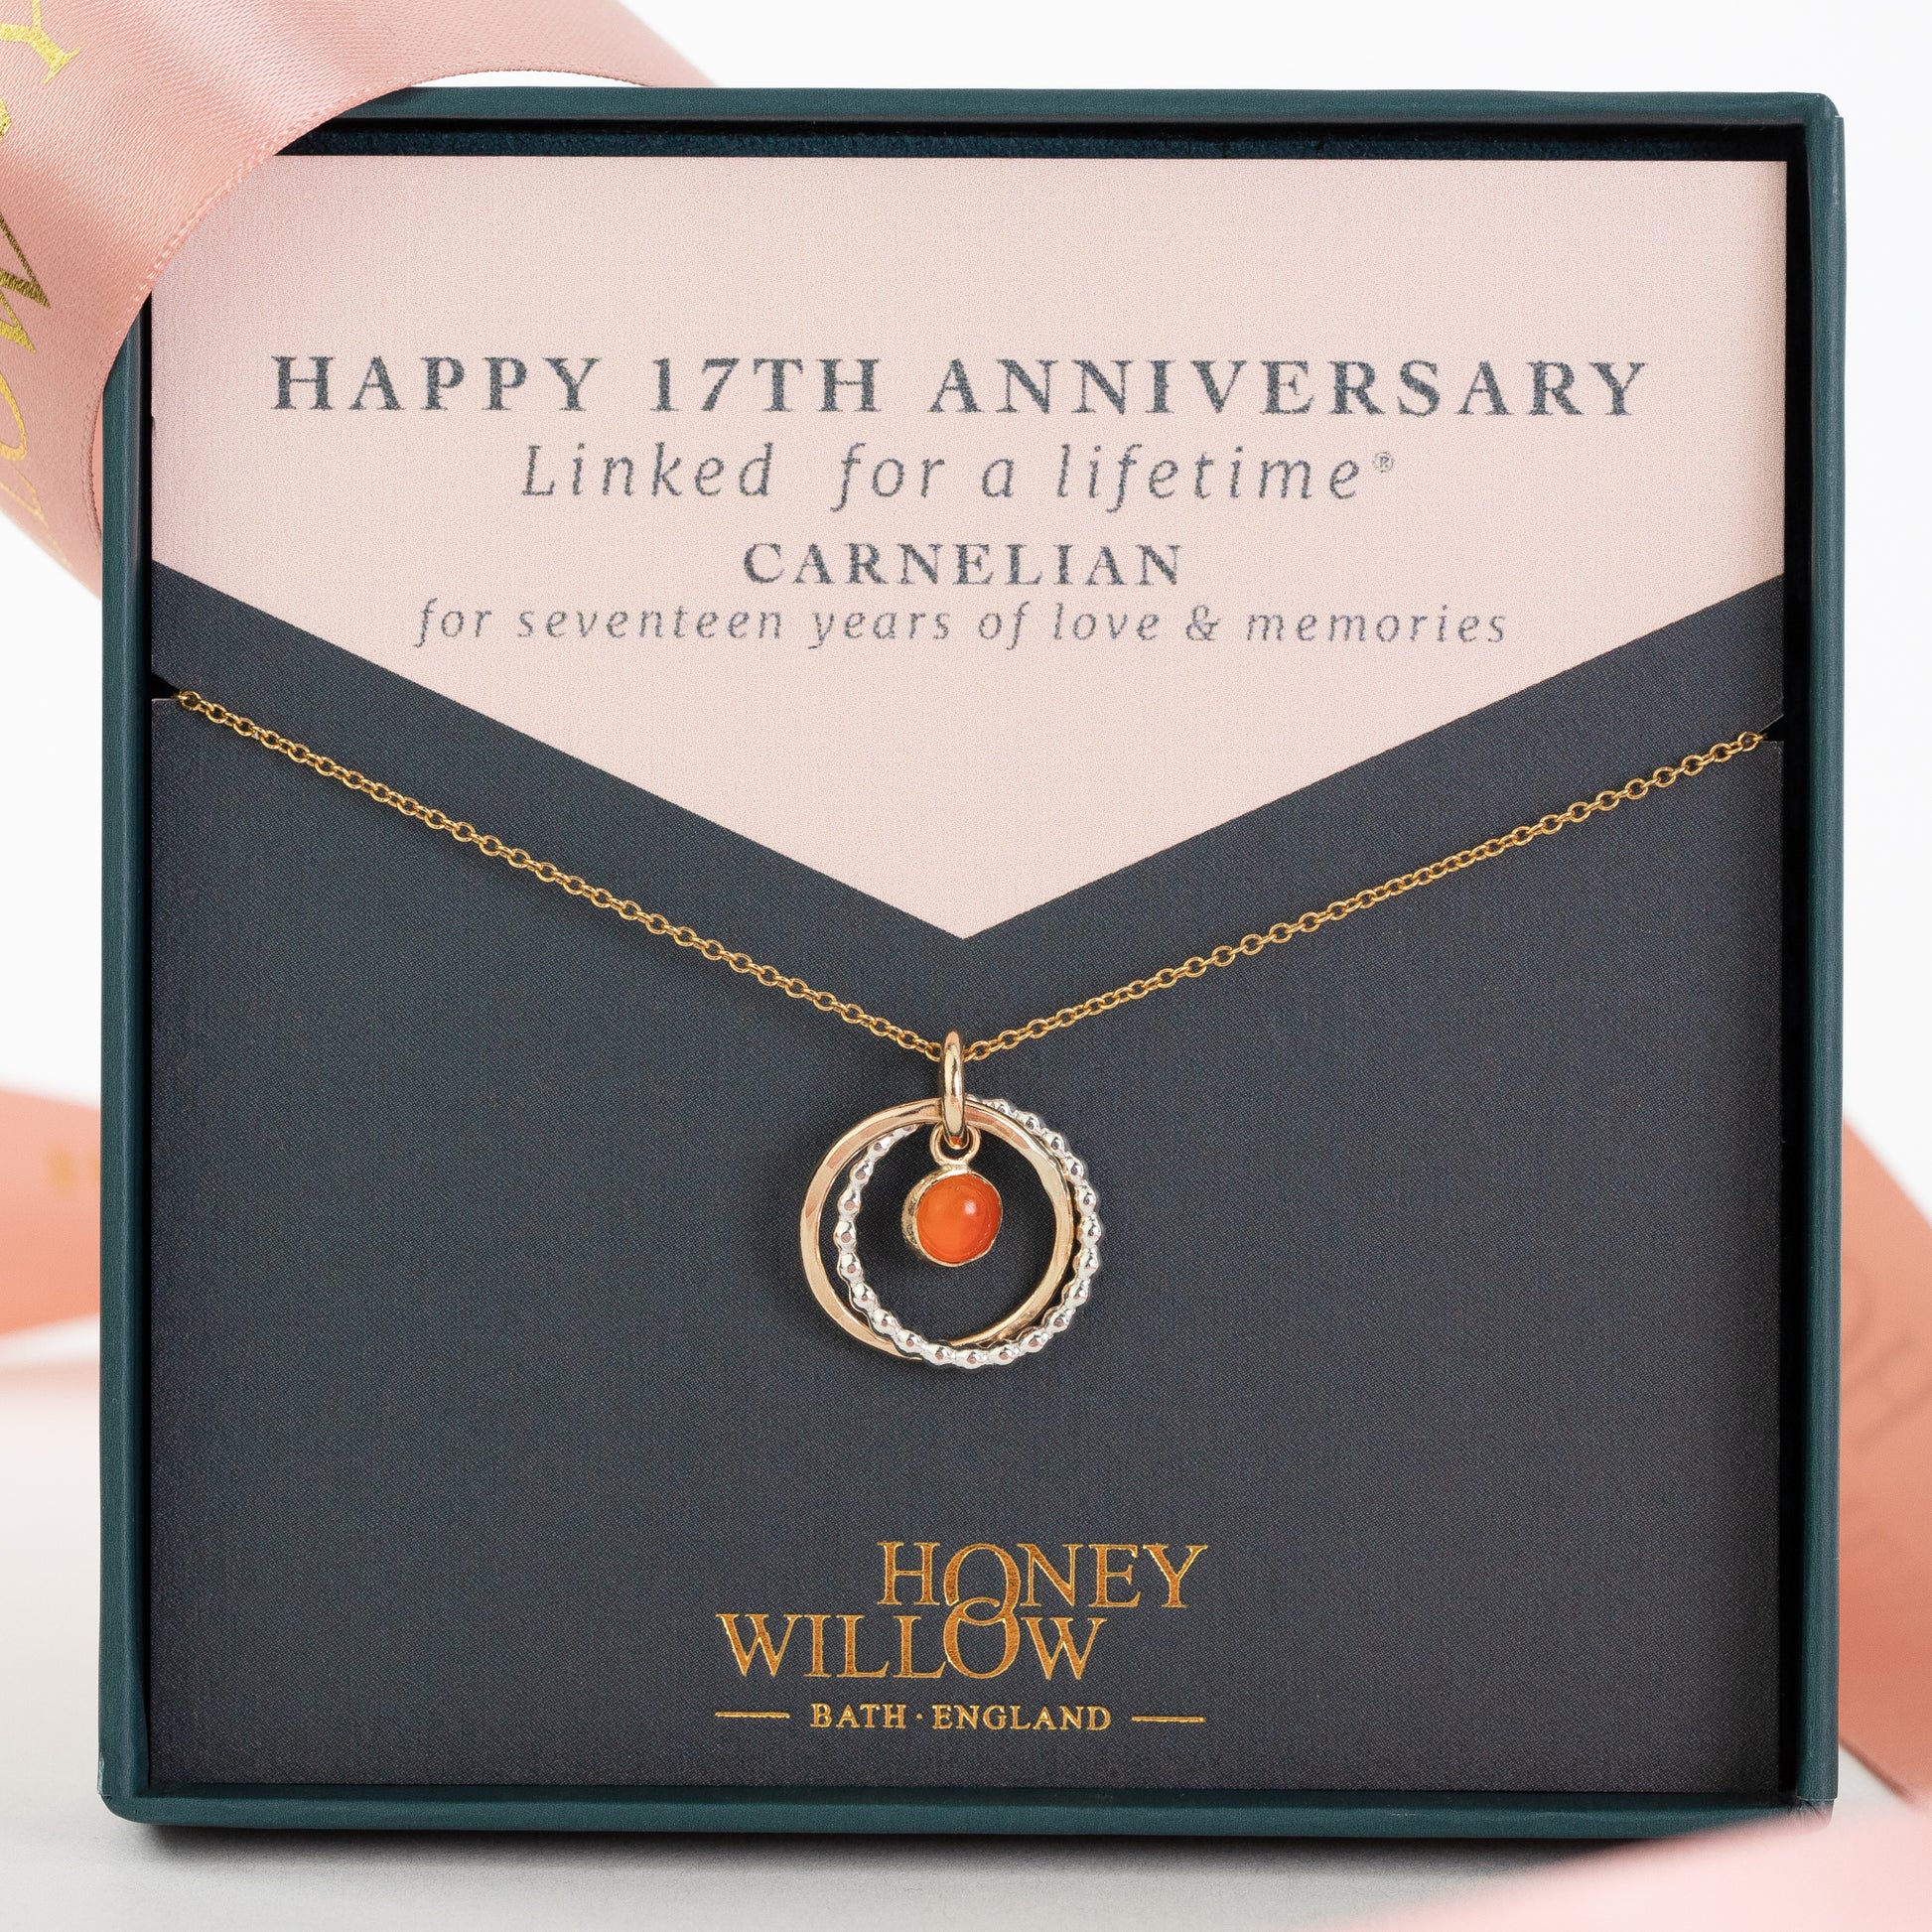 17th Anniversary Gift - Carnelian Necklace - Silver & Gold